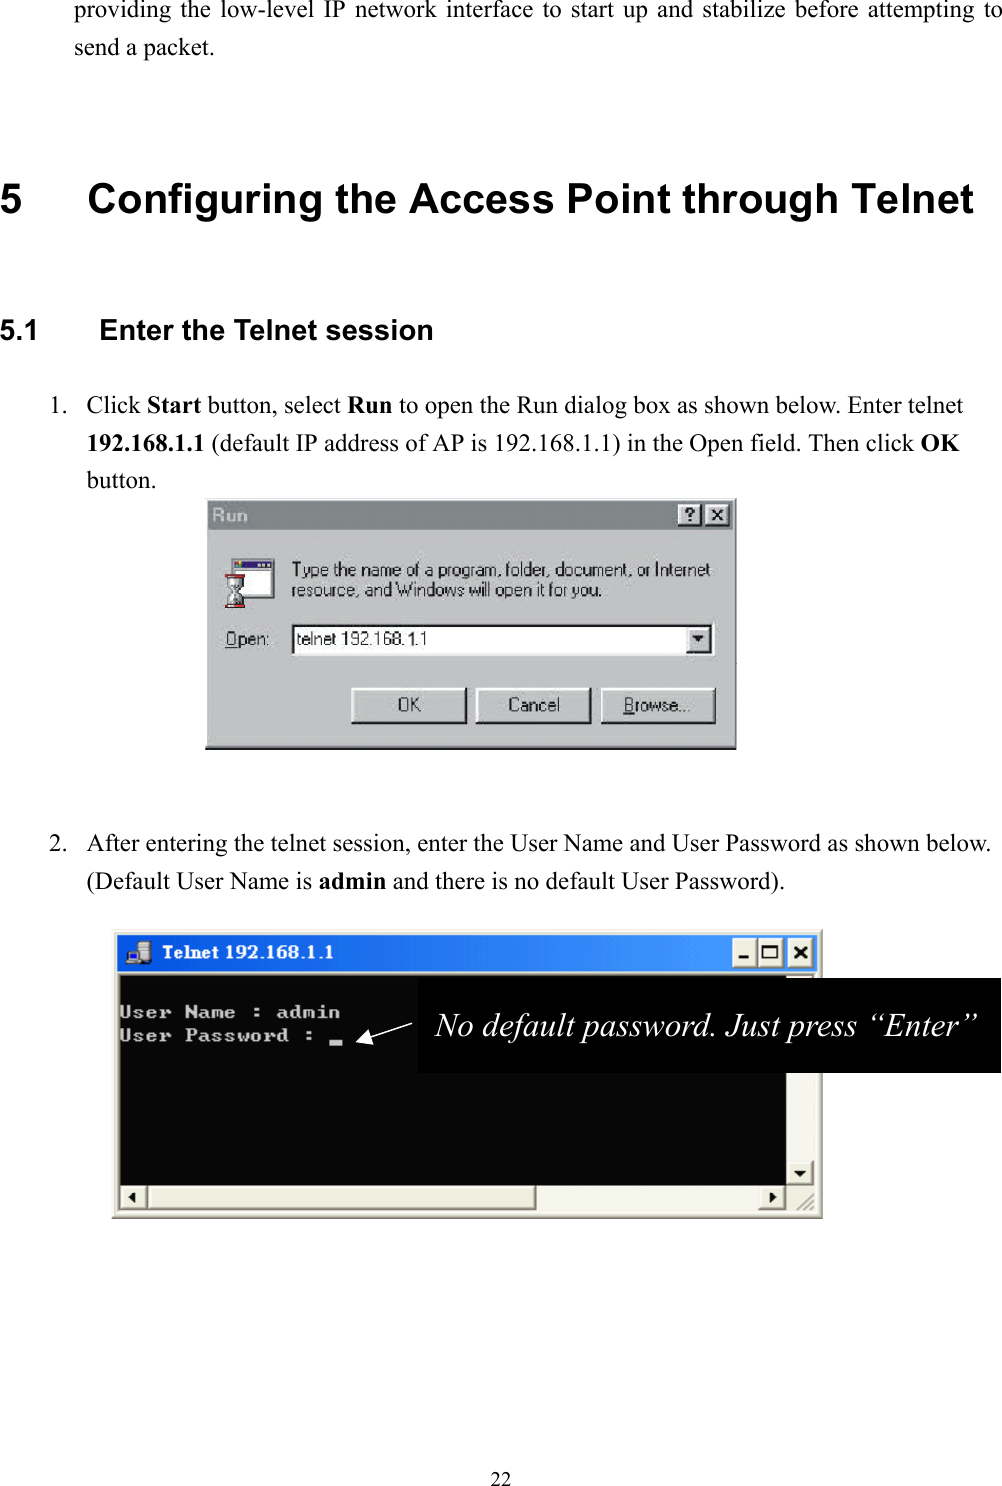 22providing the low-level IP network interface to start up and stabilize before attempting tosend a packet.5  Configuring the Access Point through Telnet5.1  Enter the Telnet session1. Click Start button, select Run to open the Run dialog box as shown below. Enter telnet192.168.1.1 (default IP address of AP is 192.168.1.1) in the Open field. Then click OKbutton.2. After entering the telnet session, enter the User Name and User Password as shown below.(Default User Name is admin and there is no default User Password).No default password. Just press “Enter”